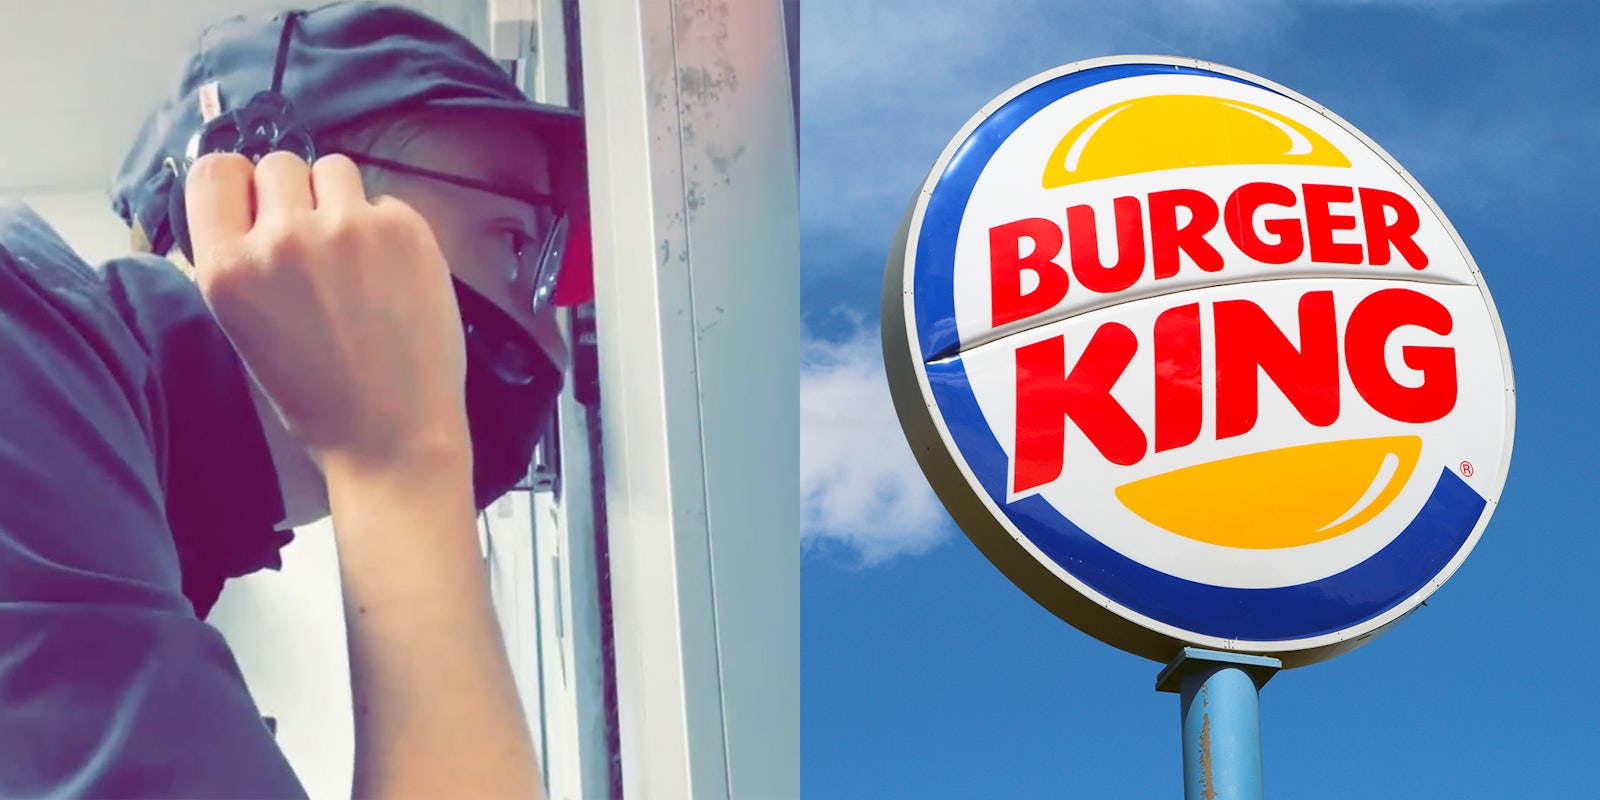 An employee (L) and a Burger King sign (R).